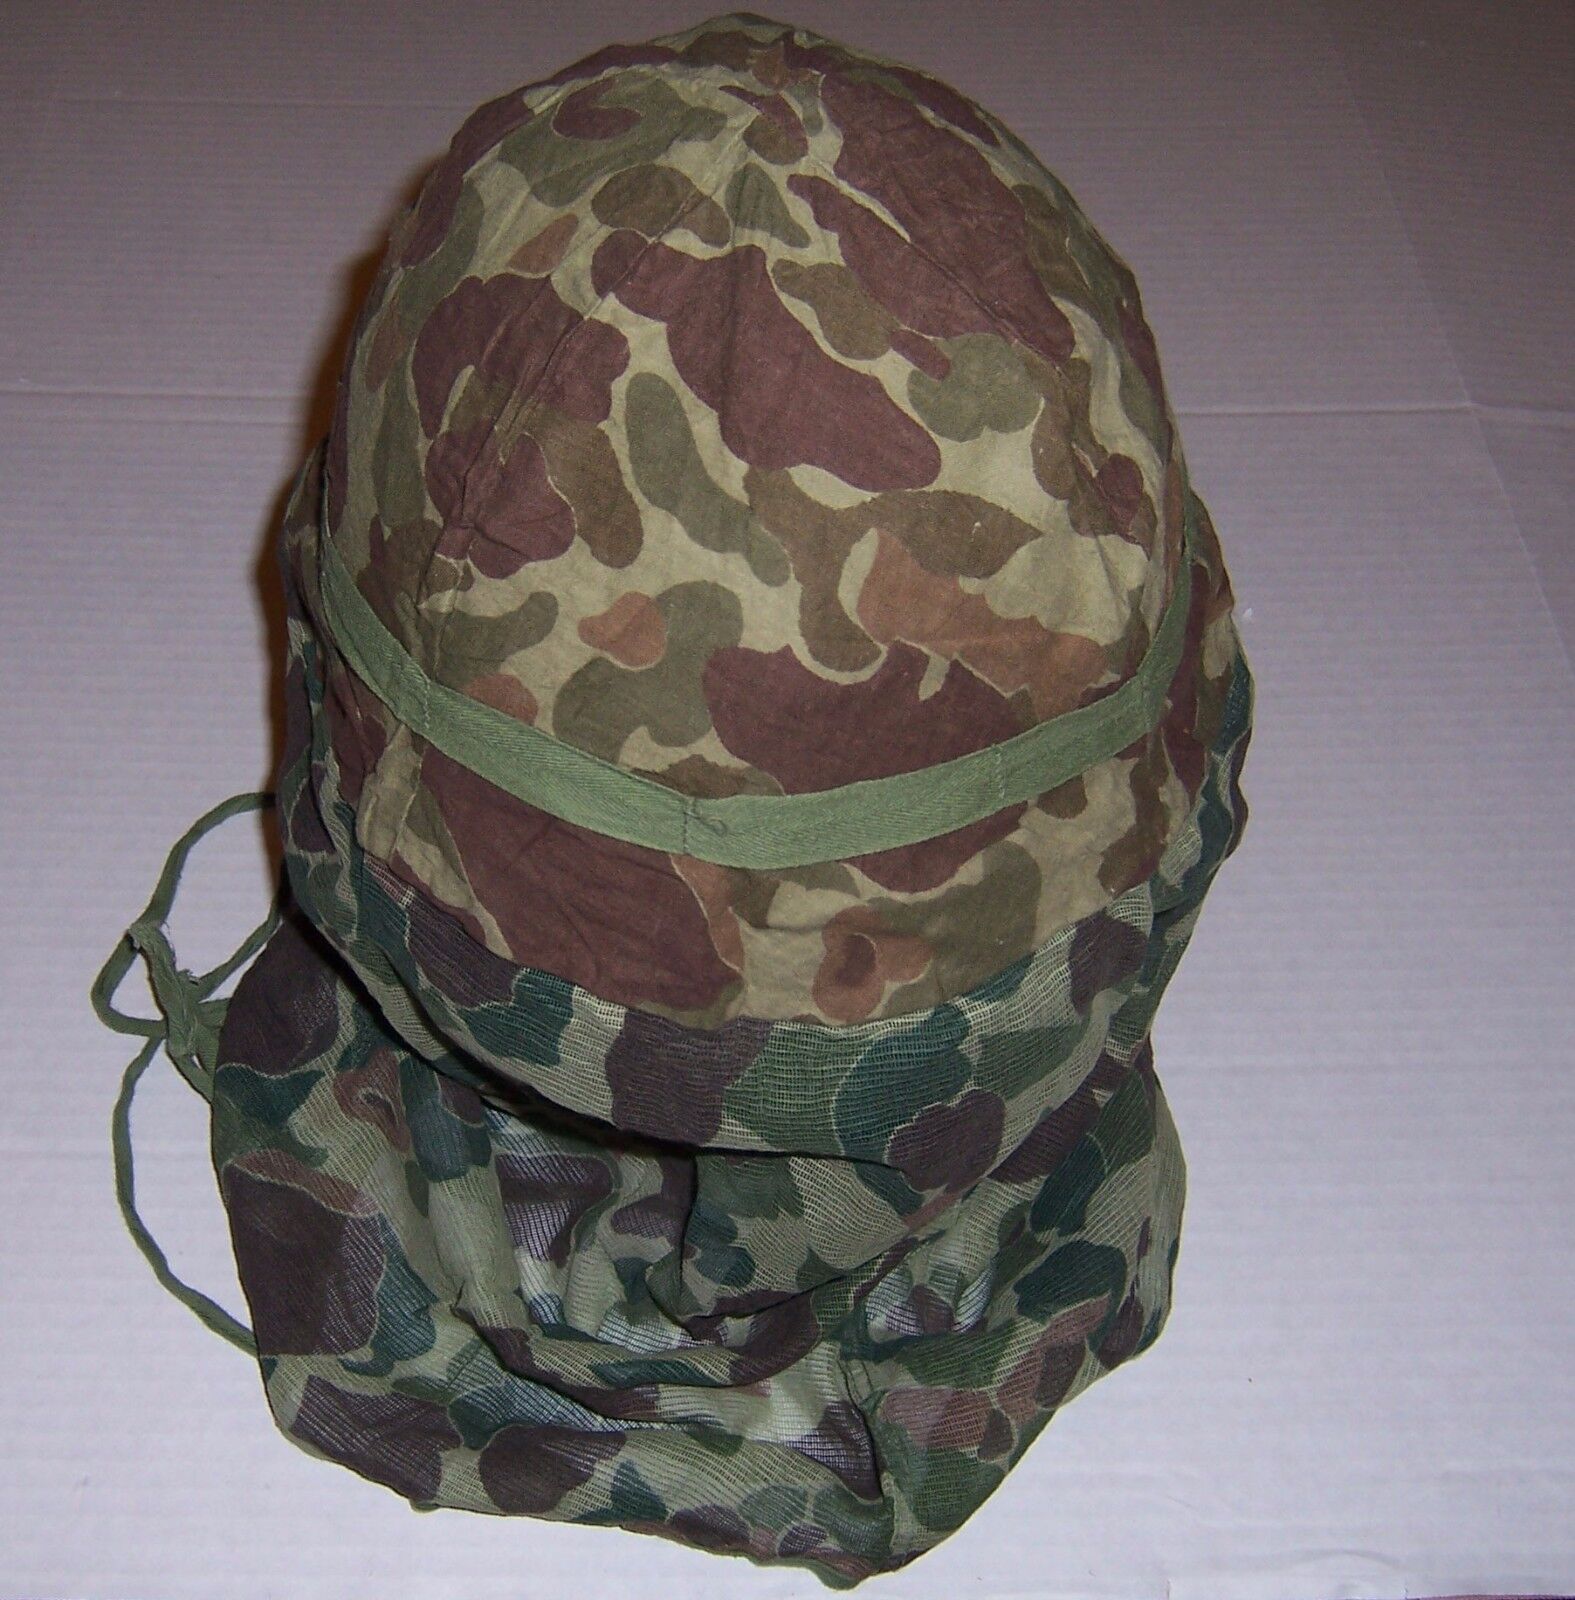 Camo helmet & face cover WWII US military genuine mosquito net world war 2